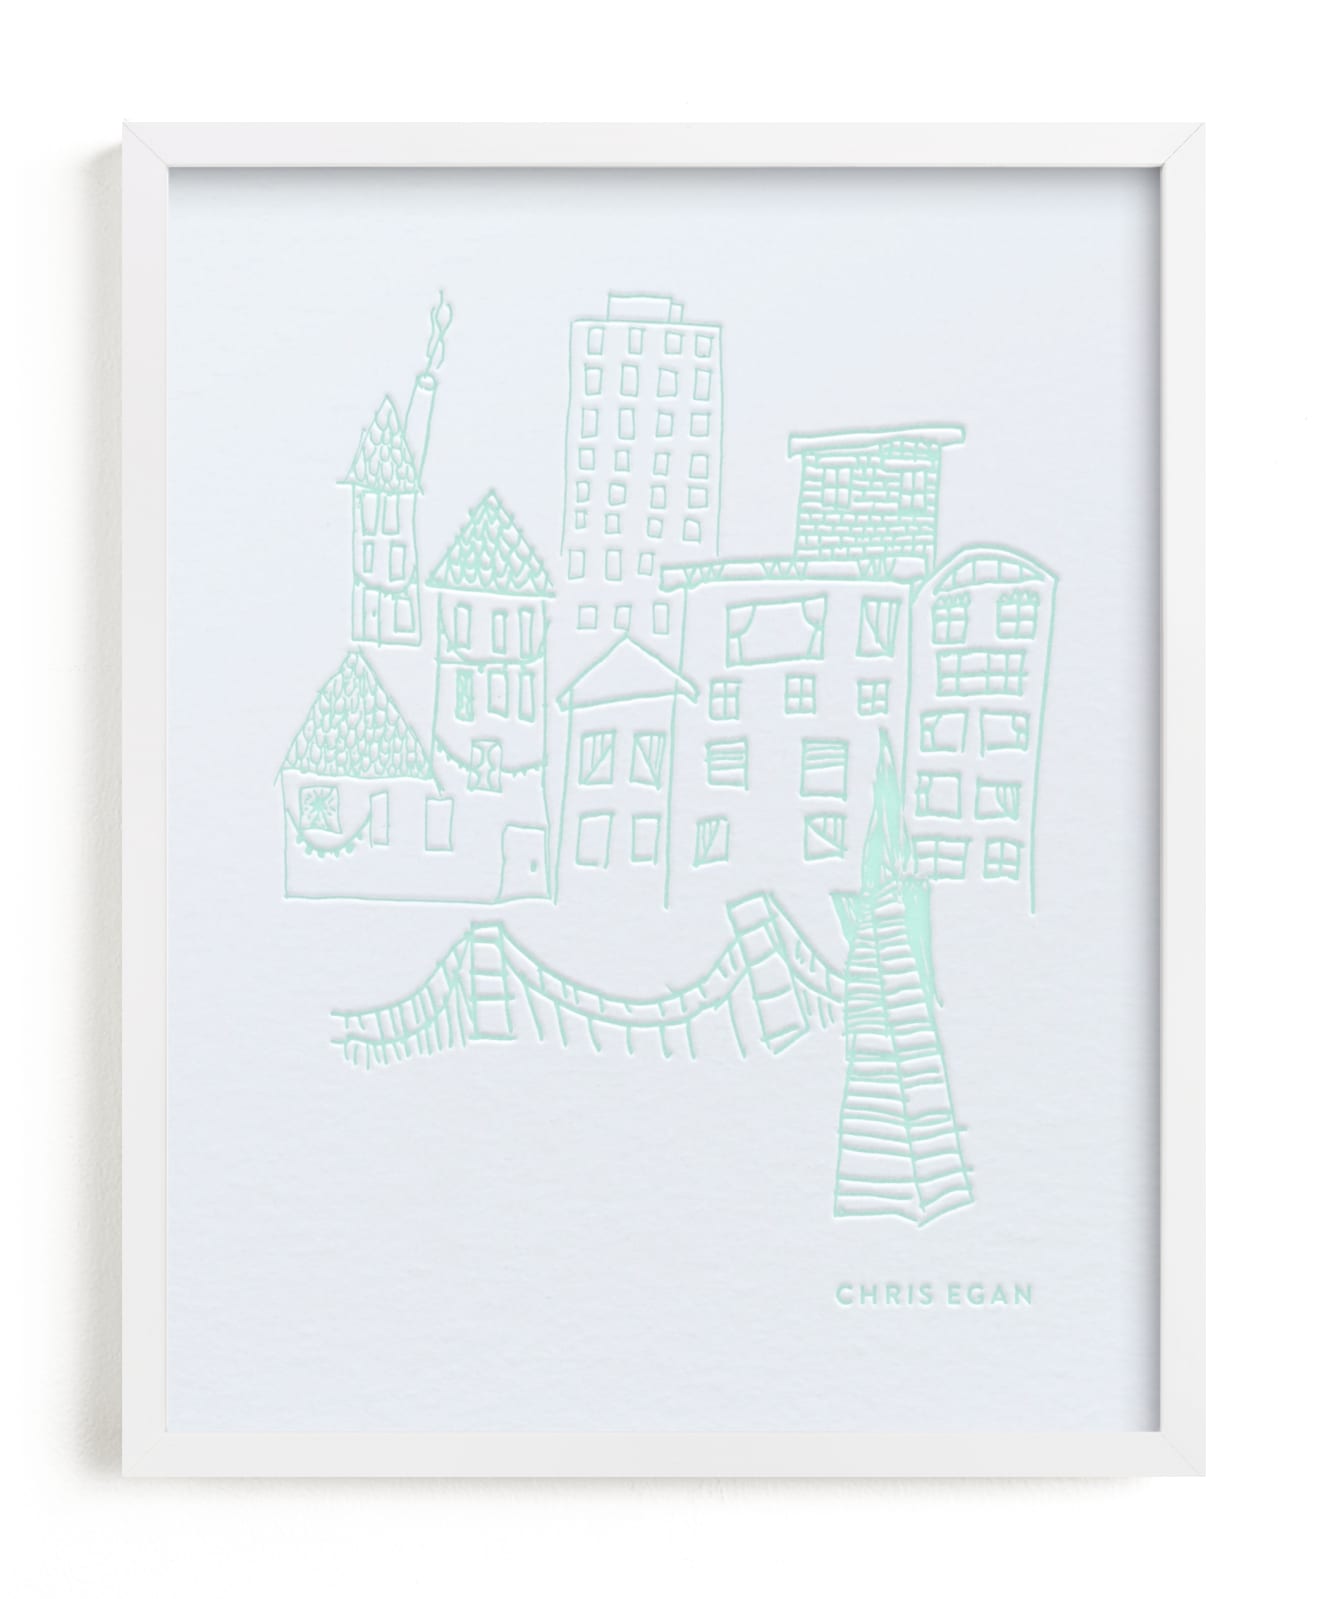 This is a green photos to art by Minted called Your Drawing as Letterpress Art Print.